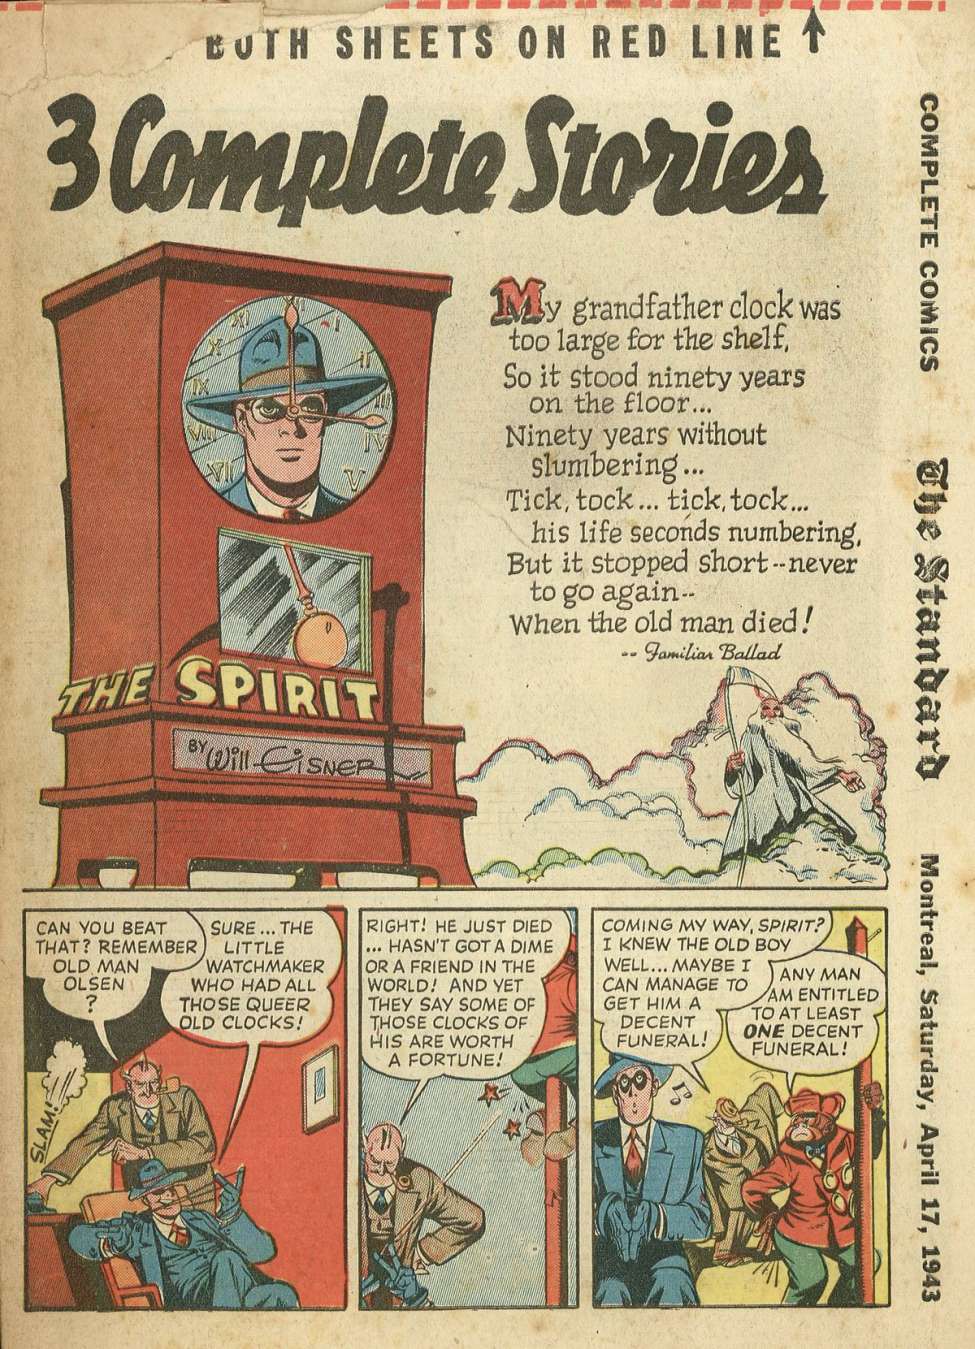 Comic Book Cover For The Spirit (1943-04-17) - Montreal Standard